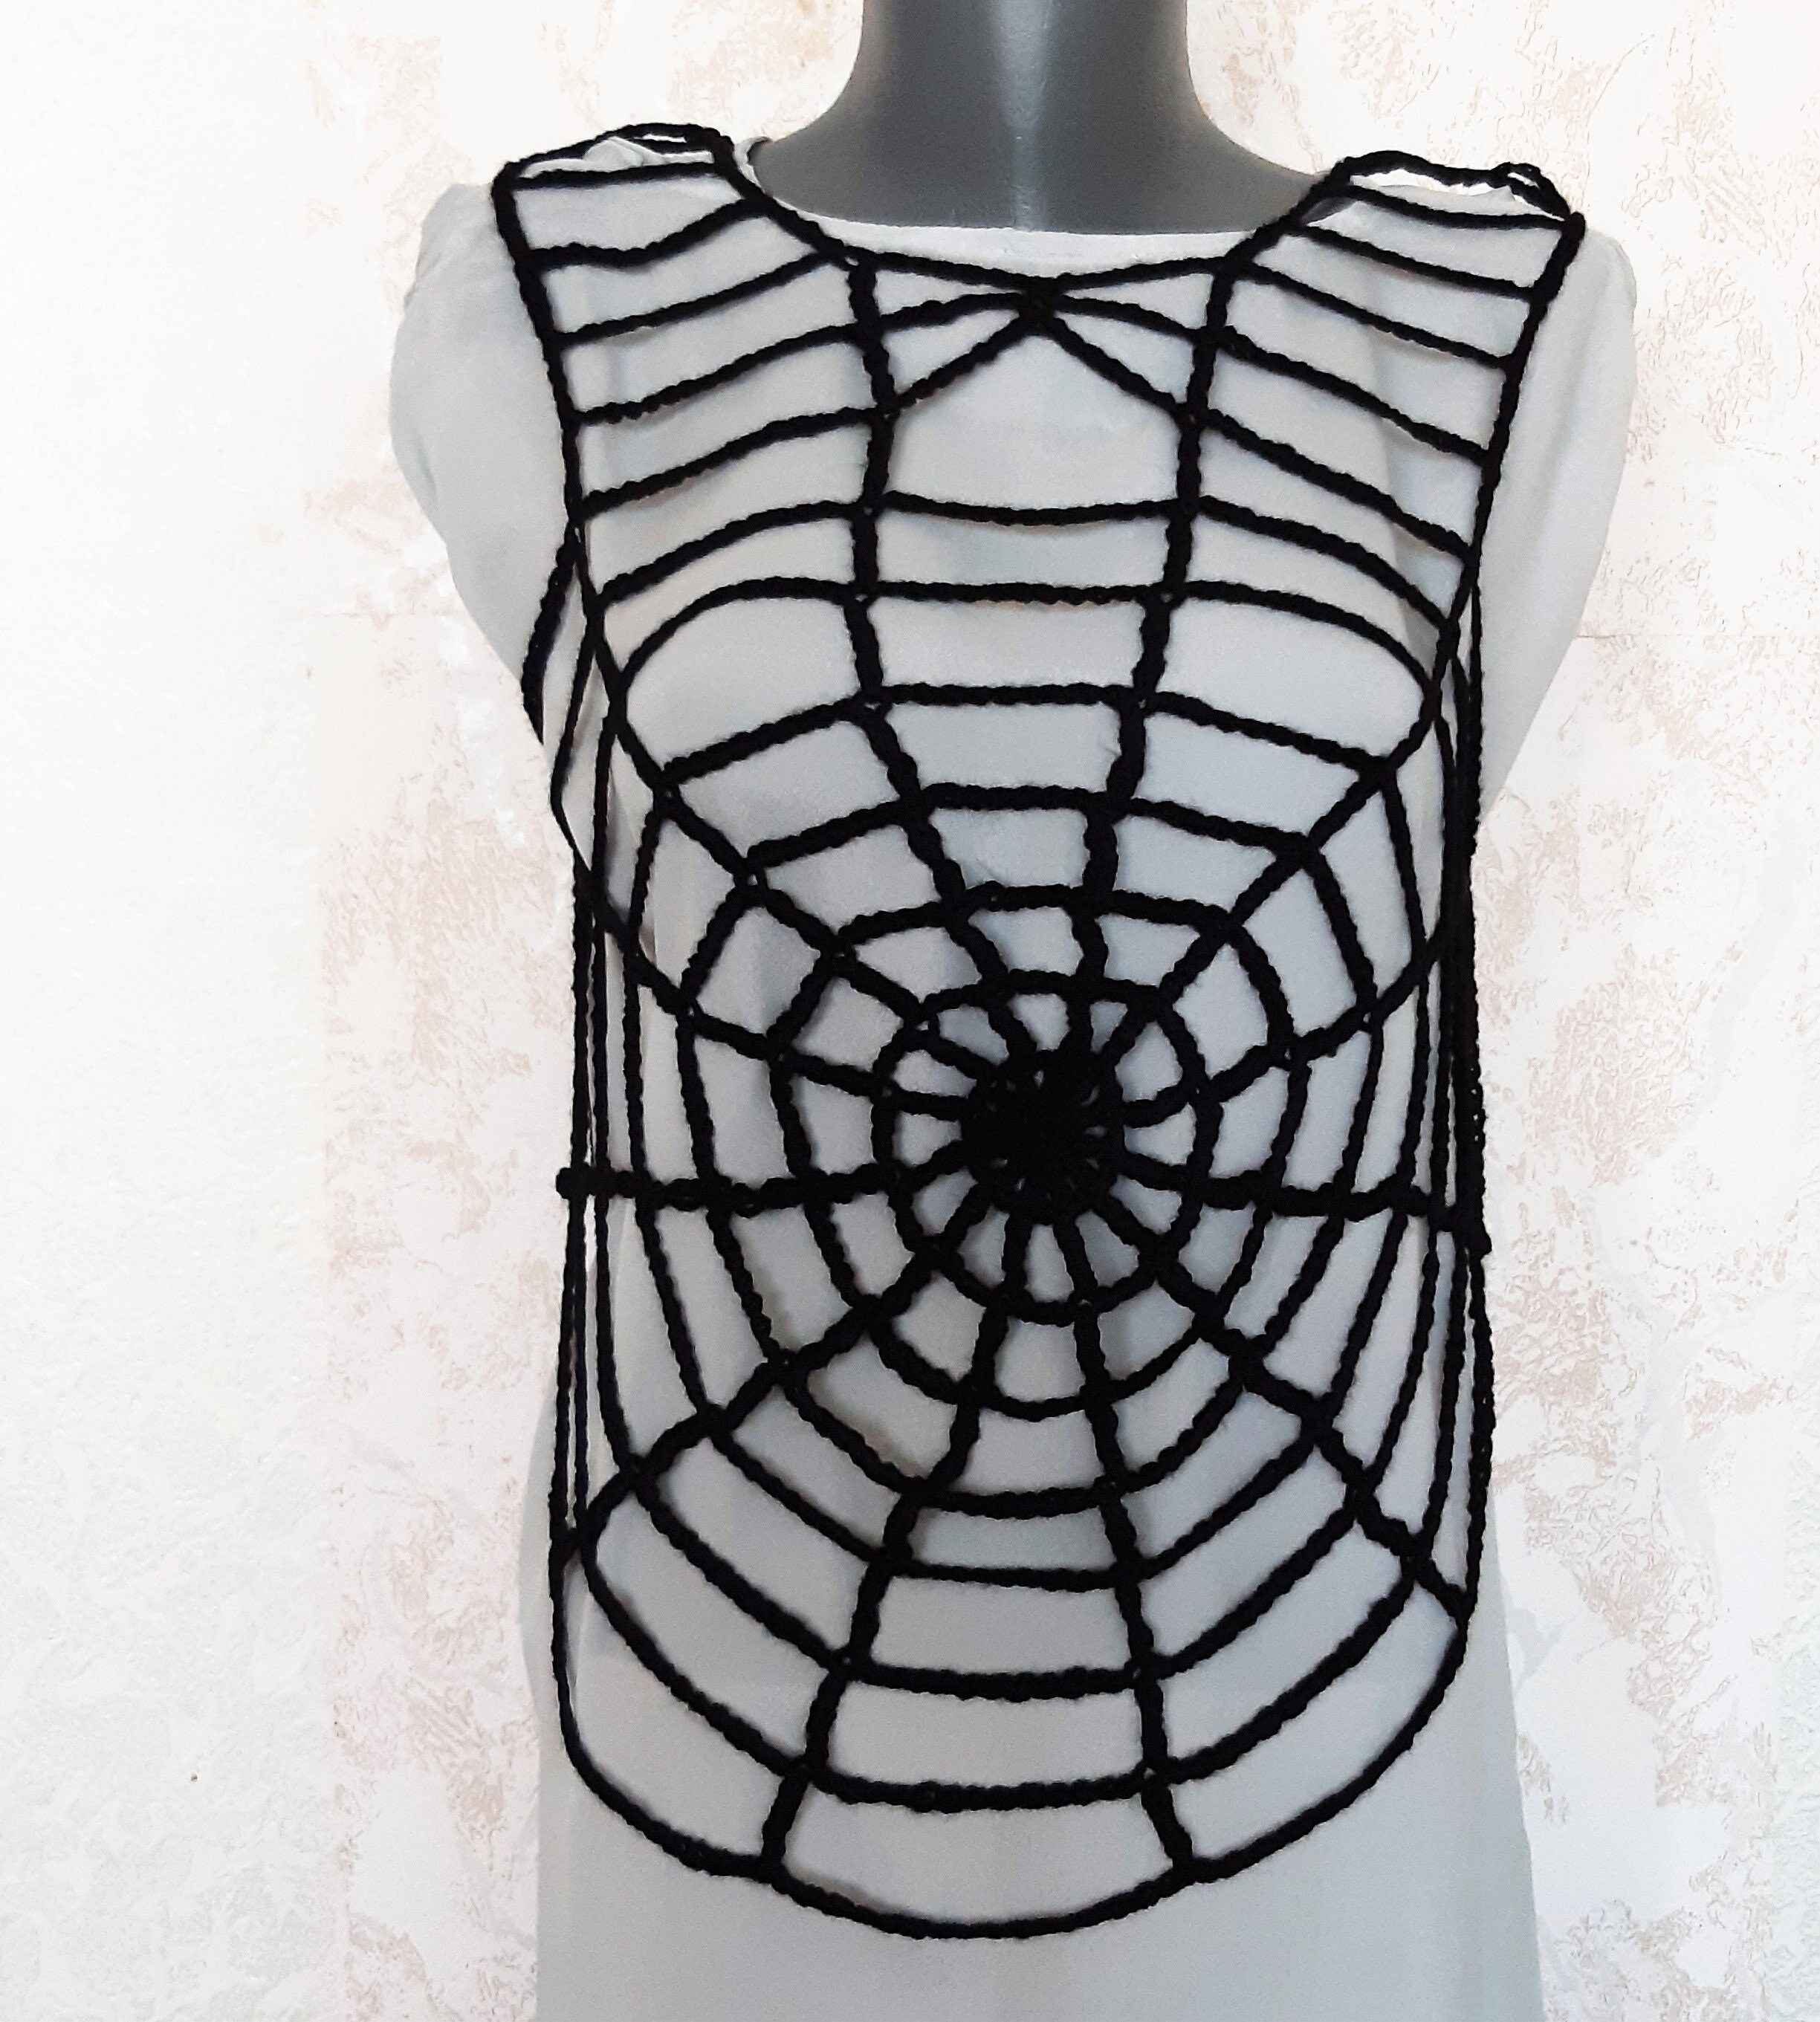 Kleding Dameskleding Tops & T-shirts Haltertops Ships free next day comes with free gift spiderweb crochet halter top with adjustable corset matching headband with dangling spider 